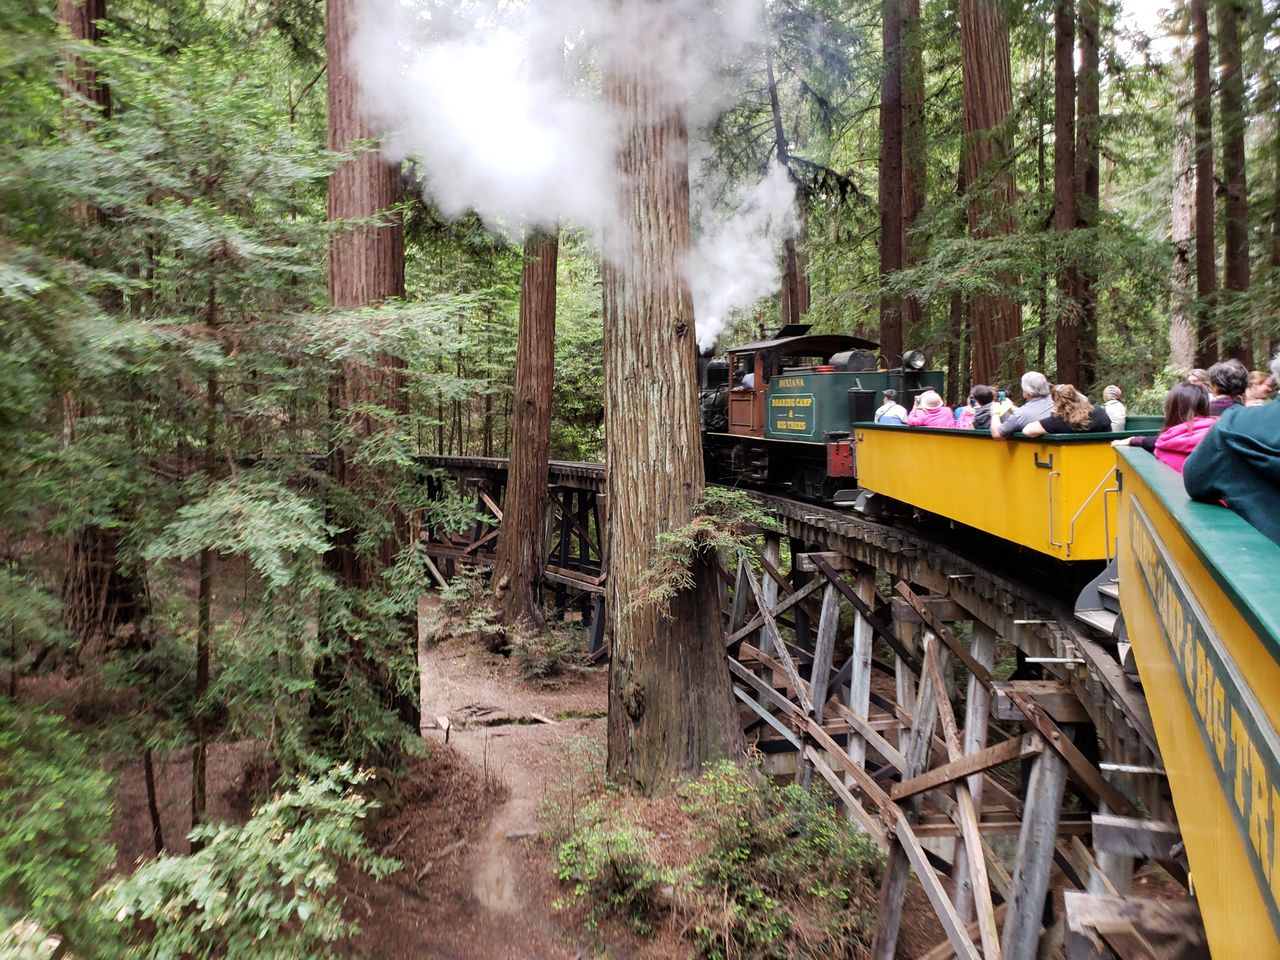 Embark on a Scenic Train Journey through the Redwoods at Roaring Camp